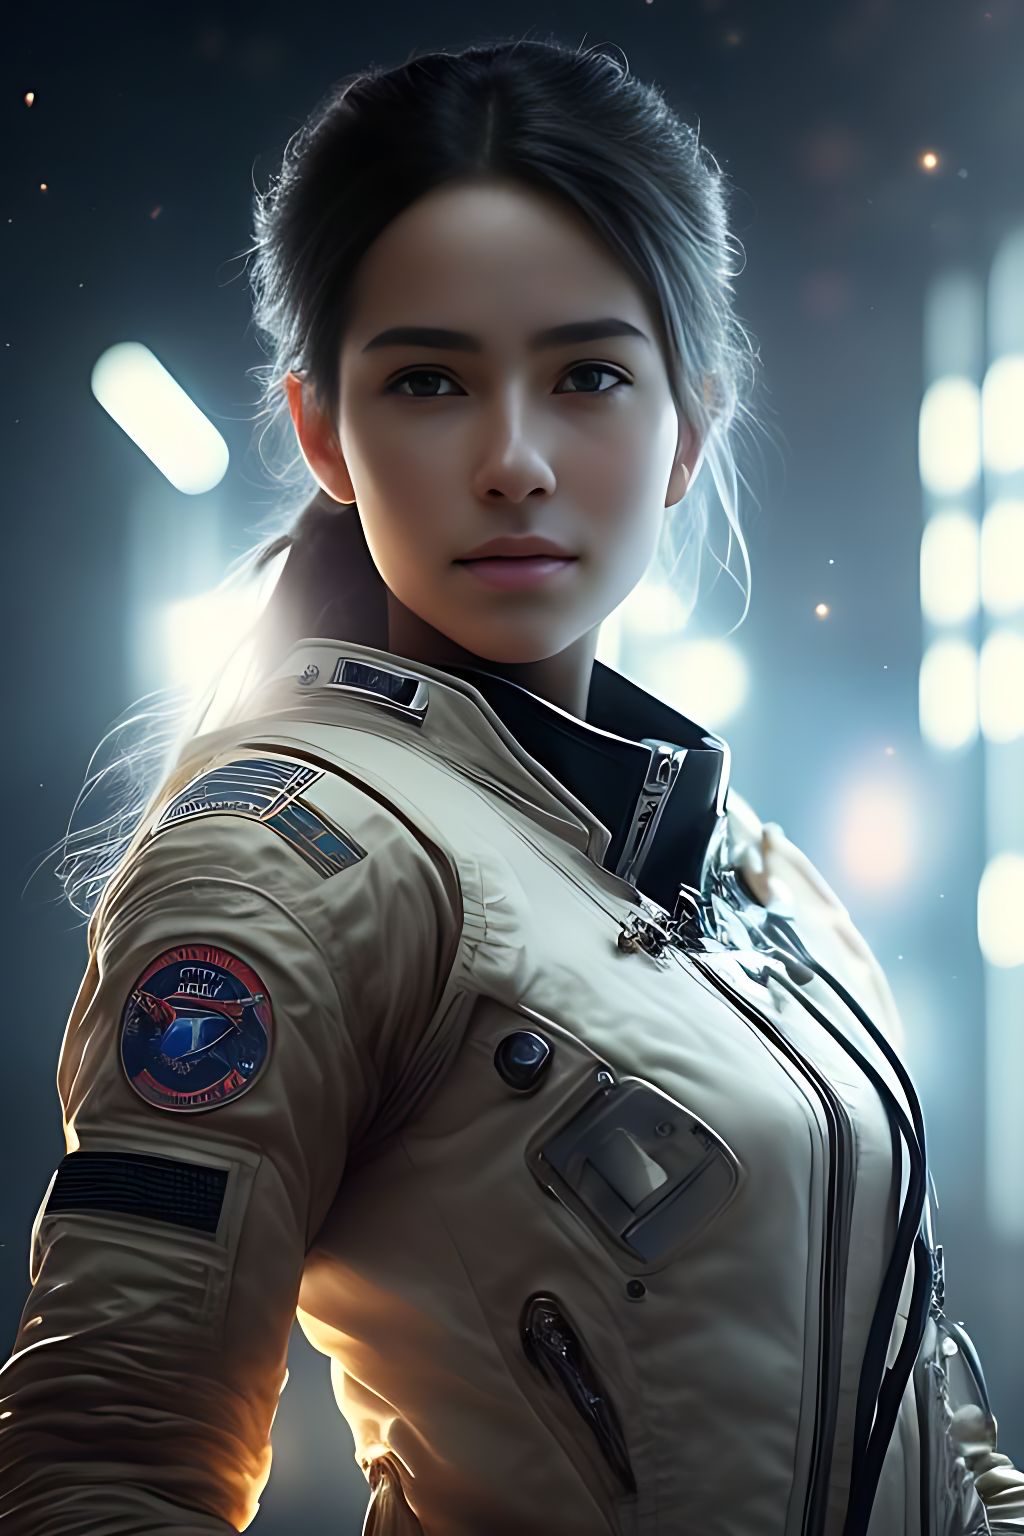 featuring medium shot anime portrait of a young women astronaut in space, stars, nebulas, realistic pose, hyper real, octane render, cinematic lighting, 4k, edge lighting, light bloom, perfect shading, Masterpiece, Realistic, superrealism, realistic face, realistic hair, realistic eyes, realistic characters, realistic environment, realistic body, realistic physiology, hight quality, best quality, beautiful realistic photo of a realistic dramatic character, fusion between jeremy mann and childe hassam and daniel f gerhartz and rosa bonheur and thomas eakins and wes anderson", Cinematic, smooth skin, flawless complexion, uplight, illuminating, nice shot, fine detail, CinemaHelper, PhotoHelper, 16K, gfpgan, fullbody, realistic face, Long shot, fullbody